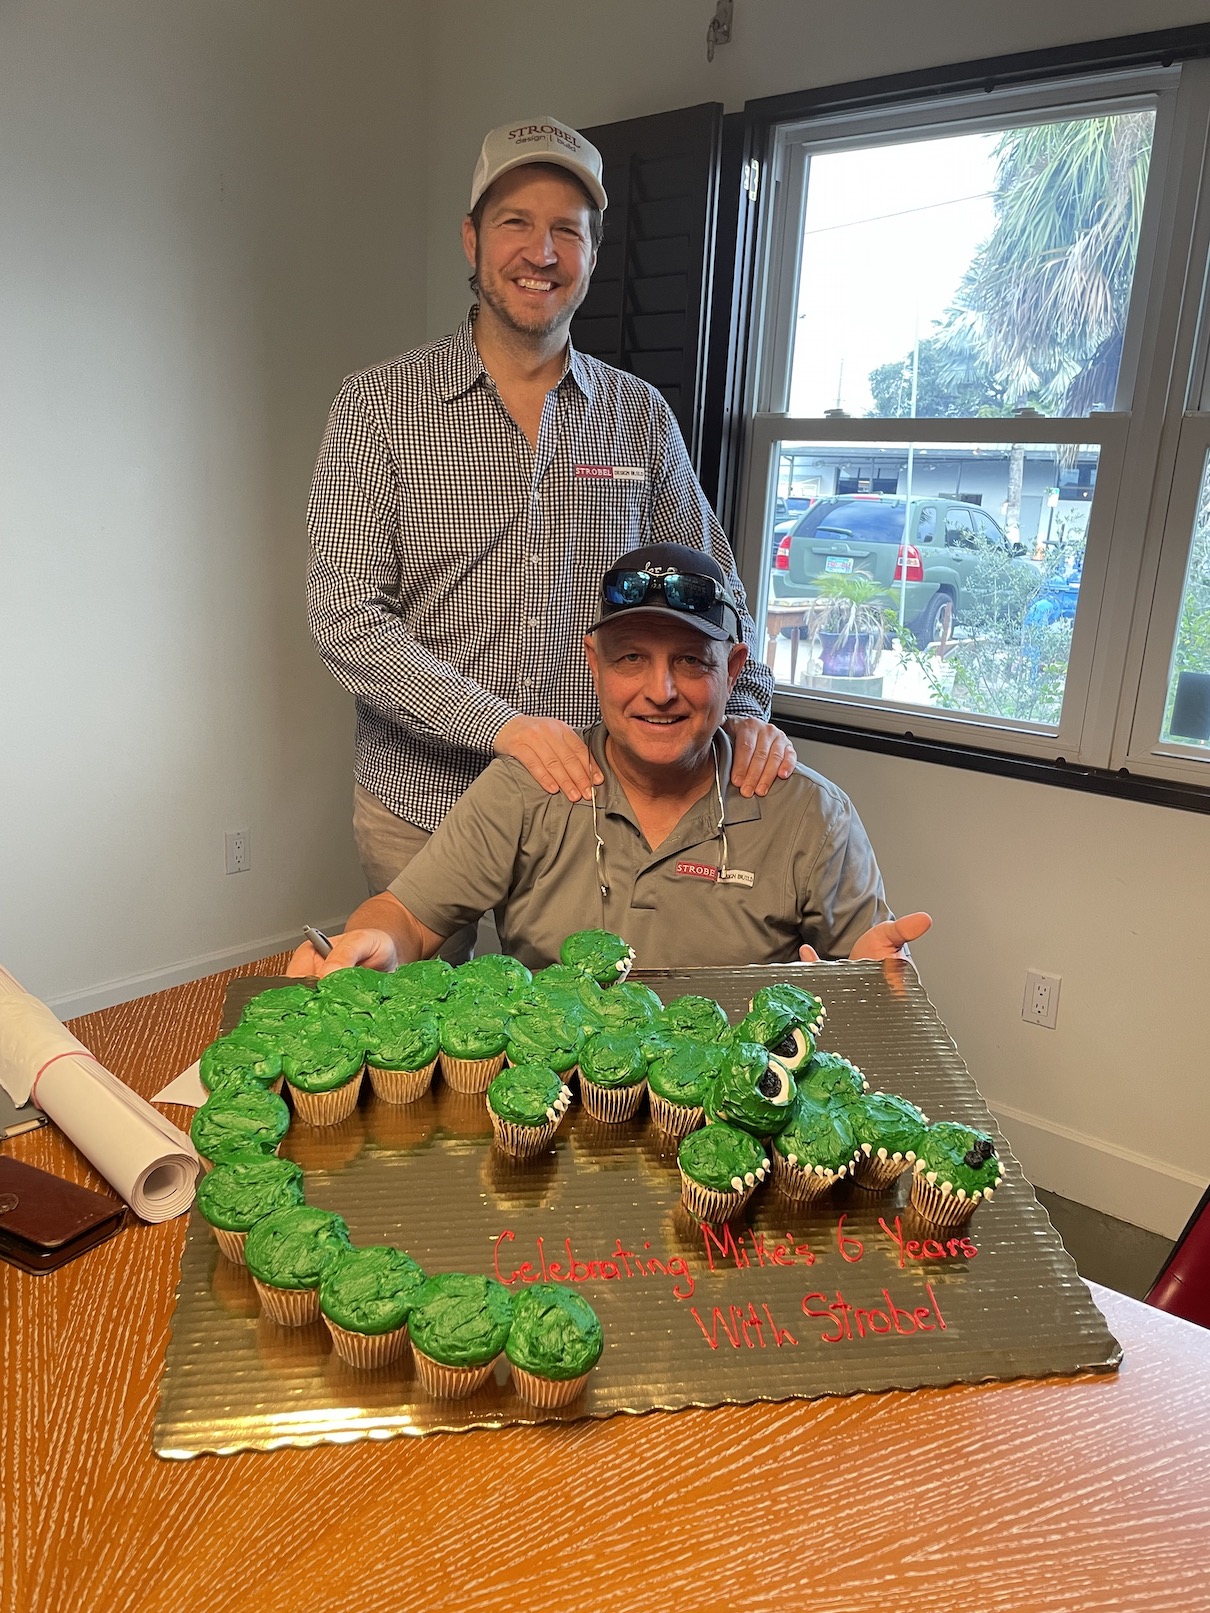 Celebrating Our Director of Construction